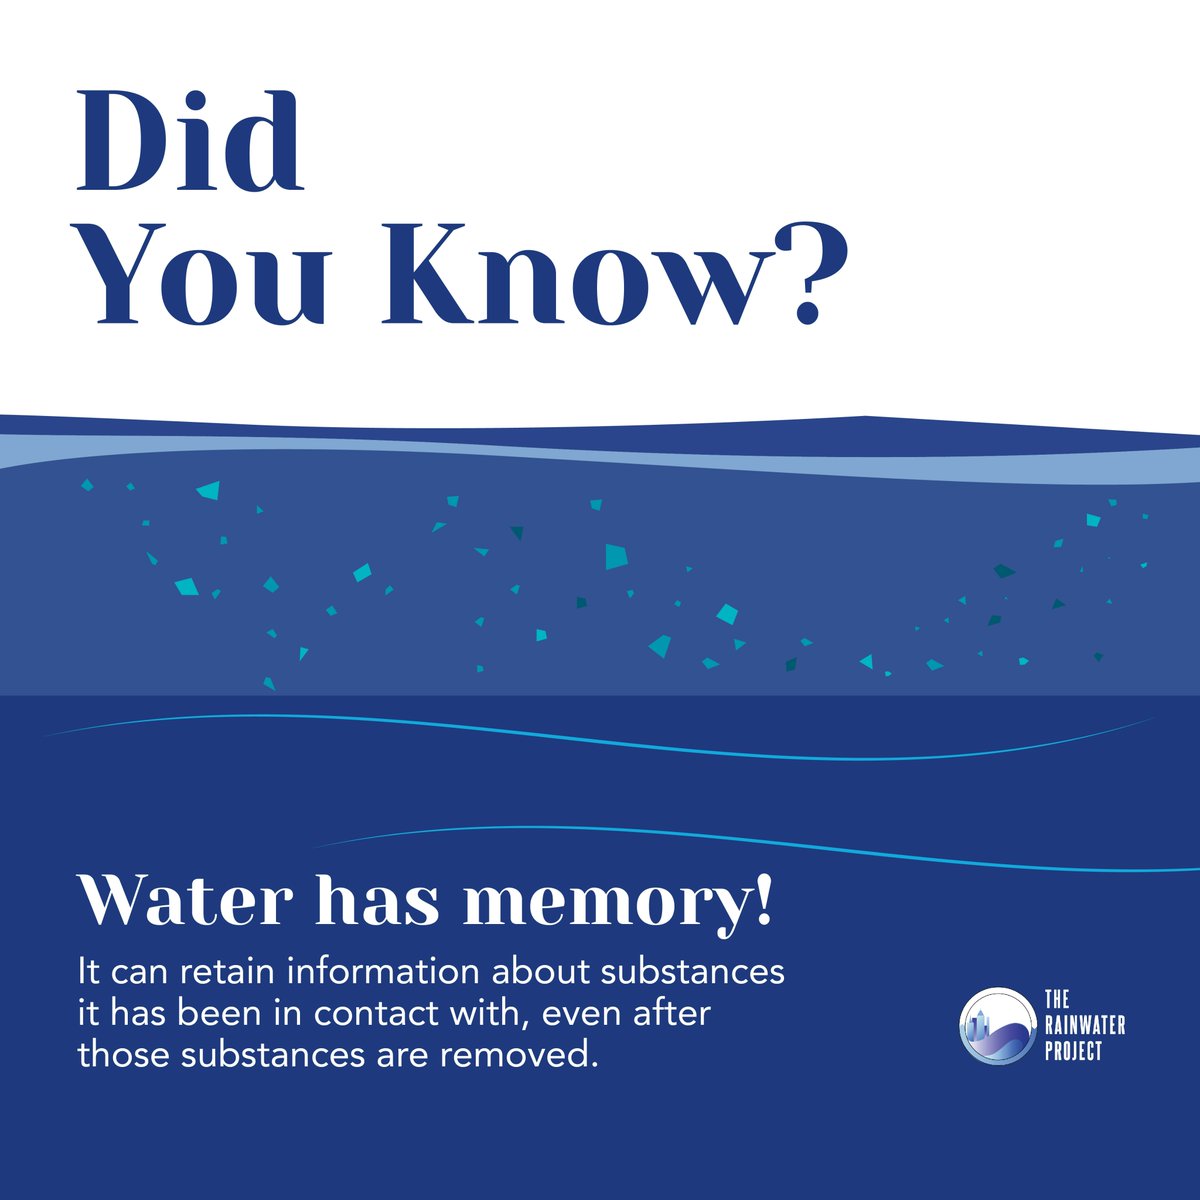 This unique quality sheds light on the profound interconnectedness of our environment and underscores the importance of safeguarding water purity. 

Explore more intriguing water facts with us!

#TheRainWaterProject #TRWPservices #DidYouKnow